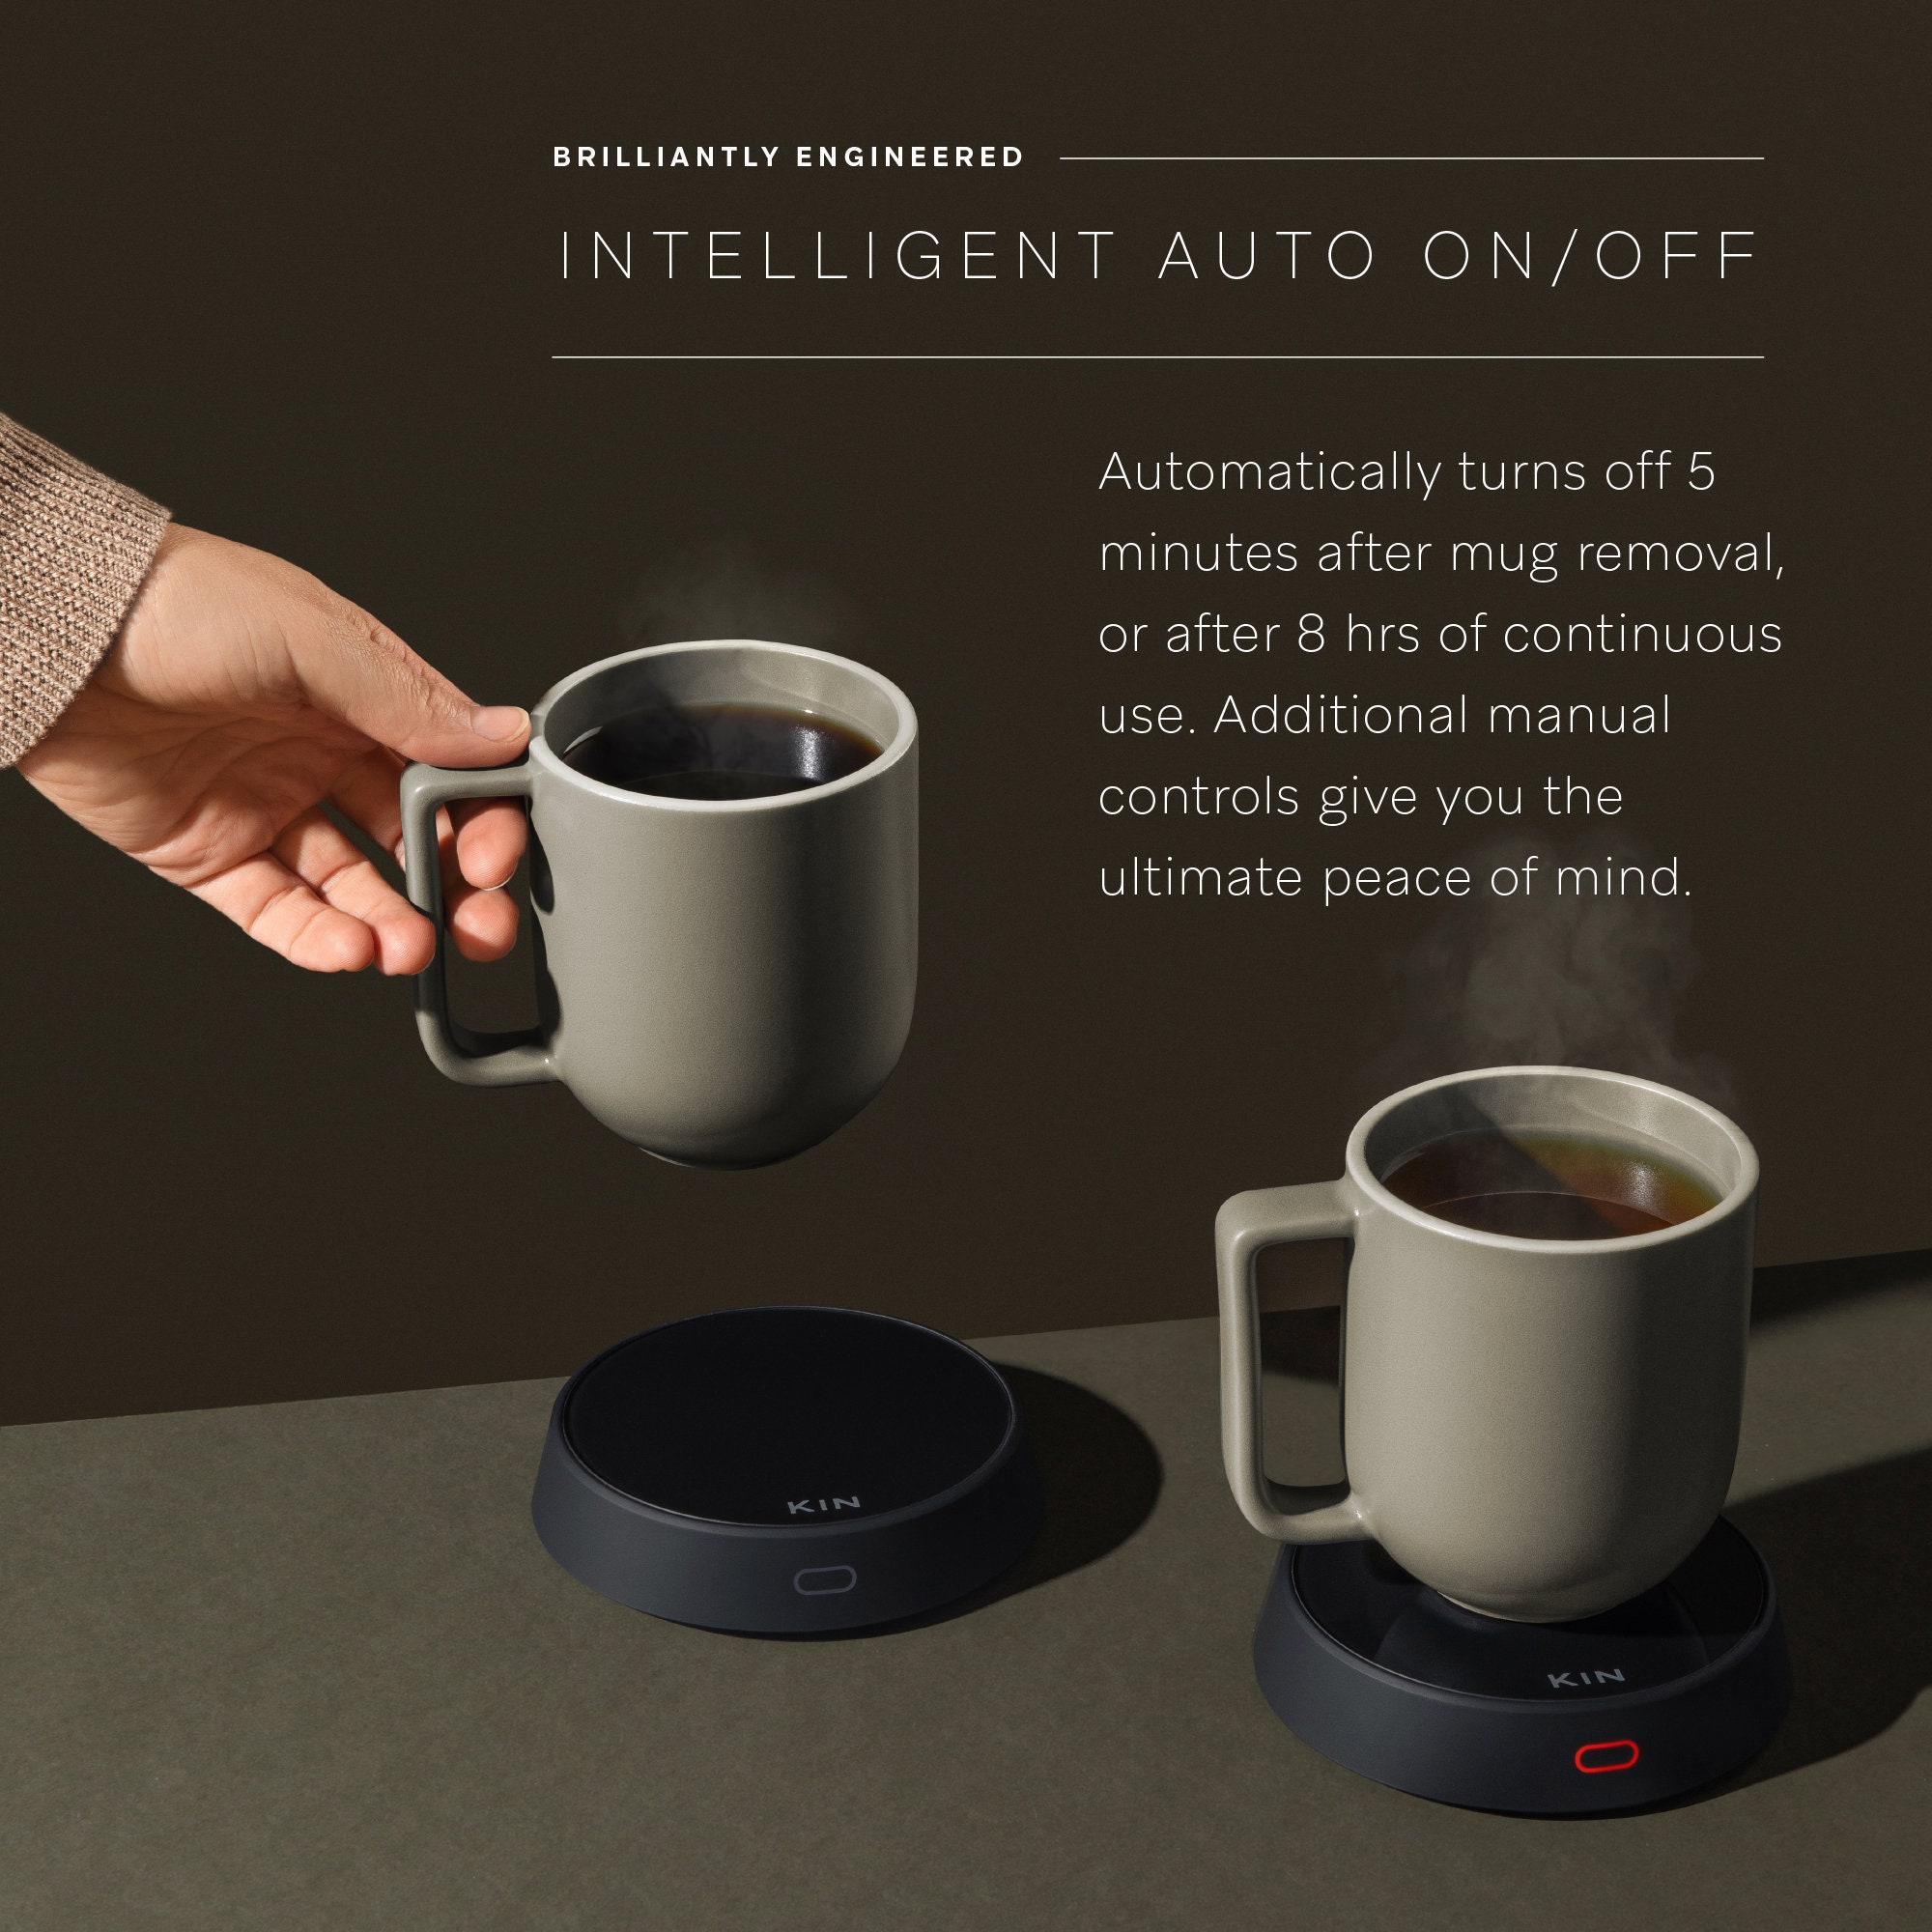 Intelligent Coffee Mug Warmer With Auto Shutofftea Cup & Candle